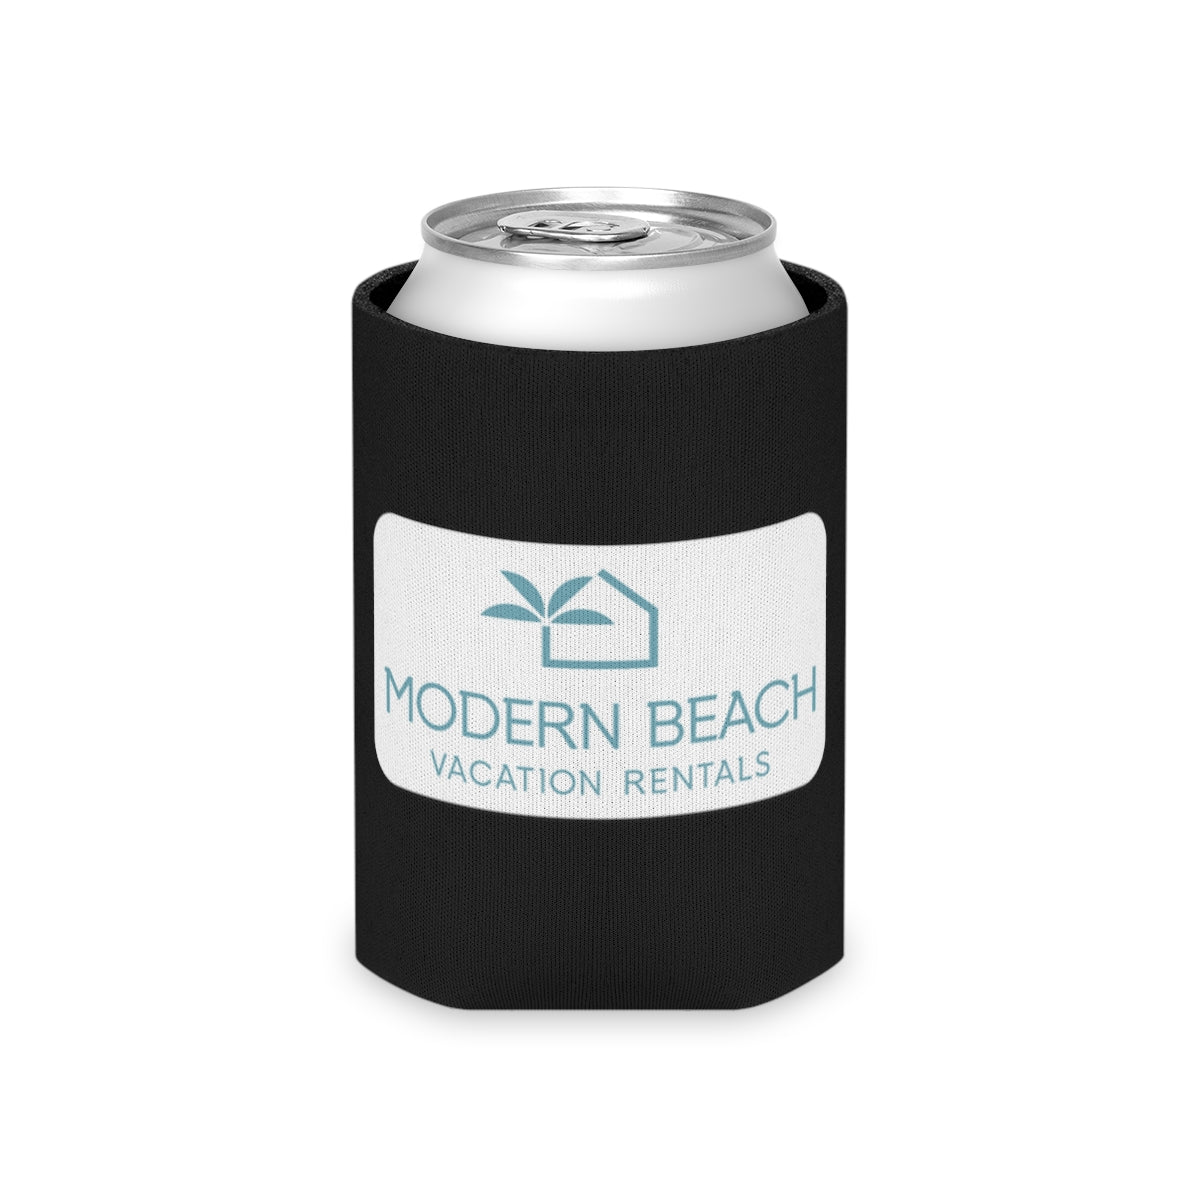 Modern Beach Vacation Rentals White Rectangle Logo Black Can Coozie Cooler